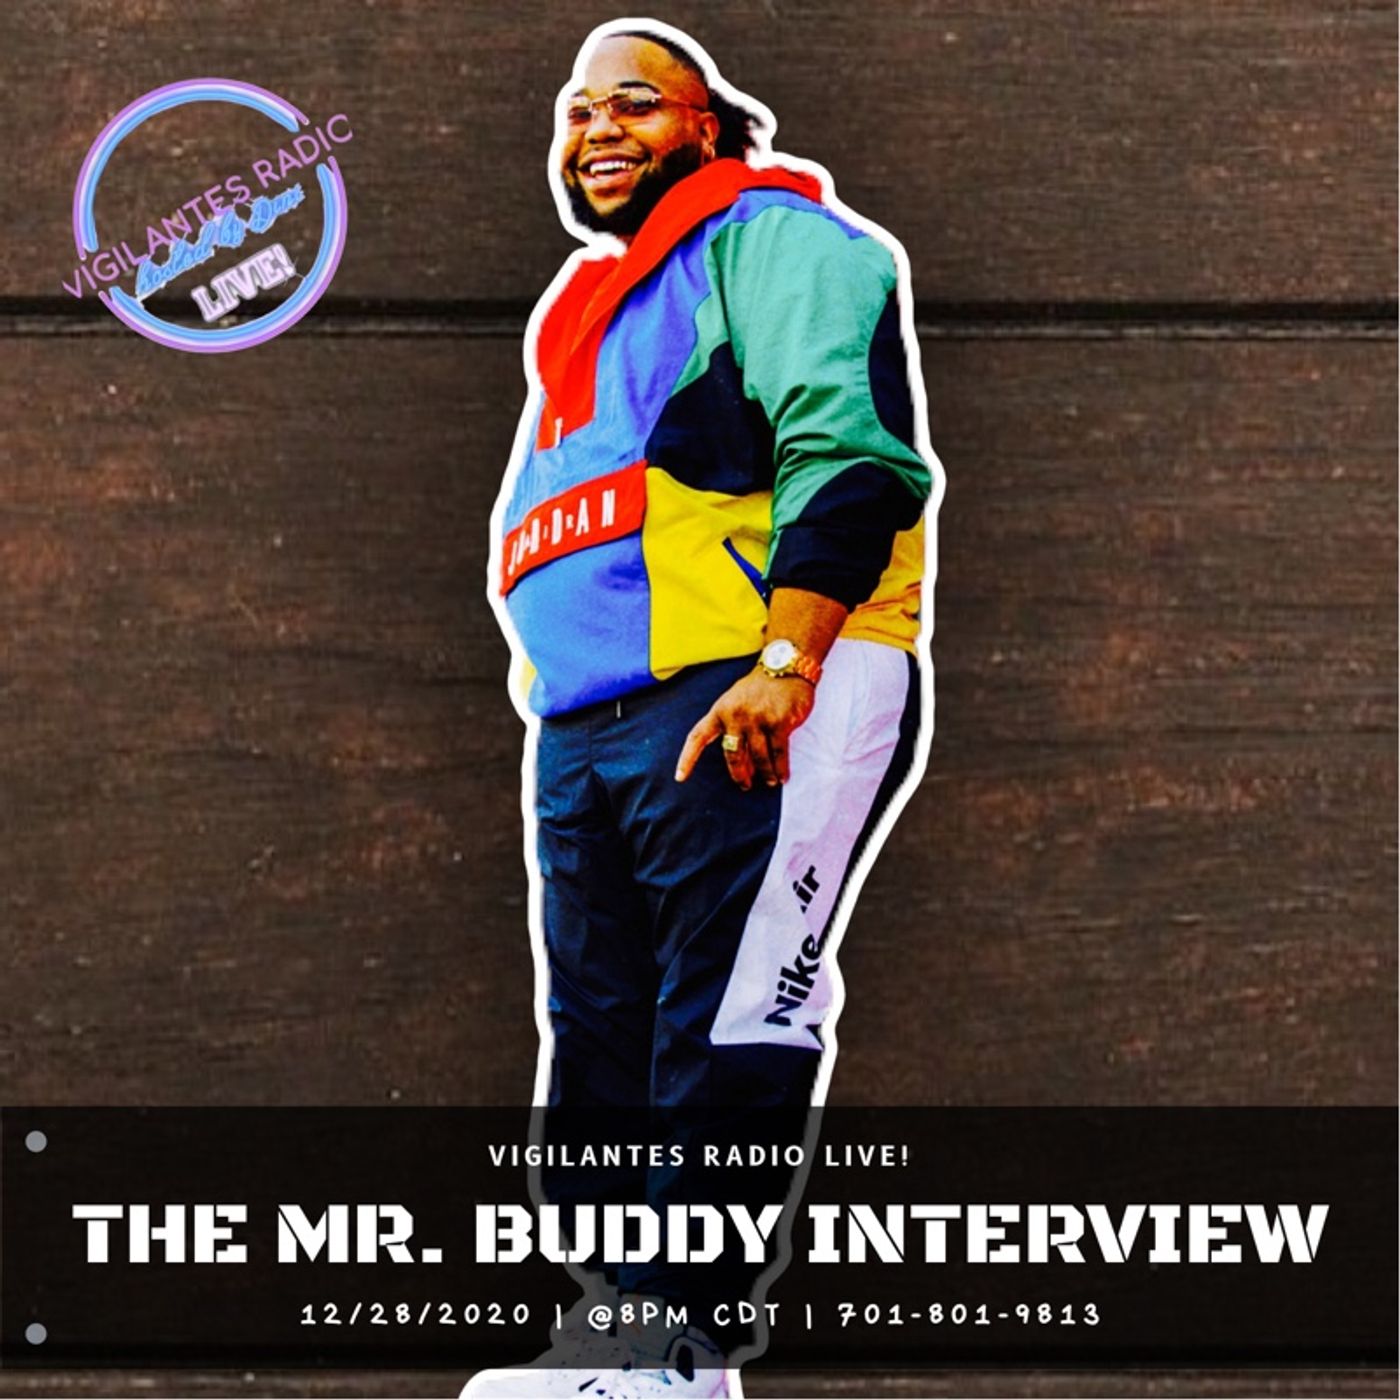 The Mr. Buddy Interview. Image